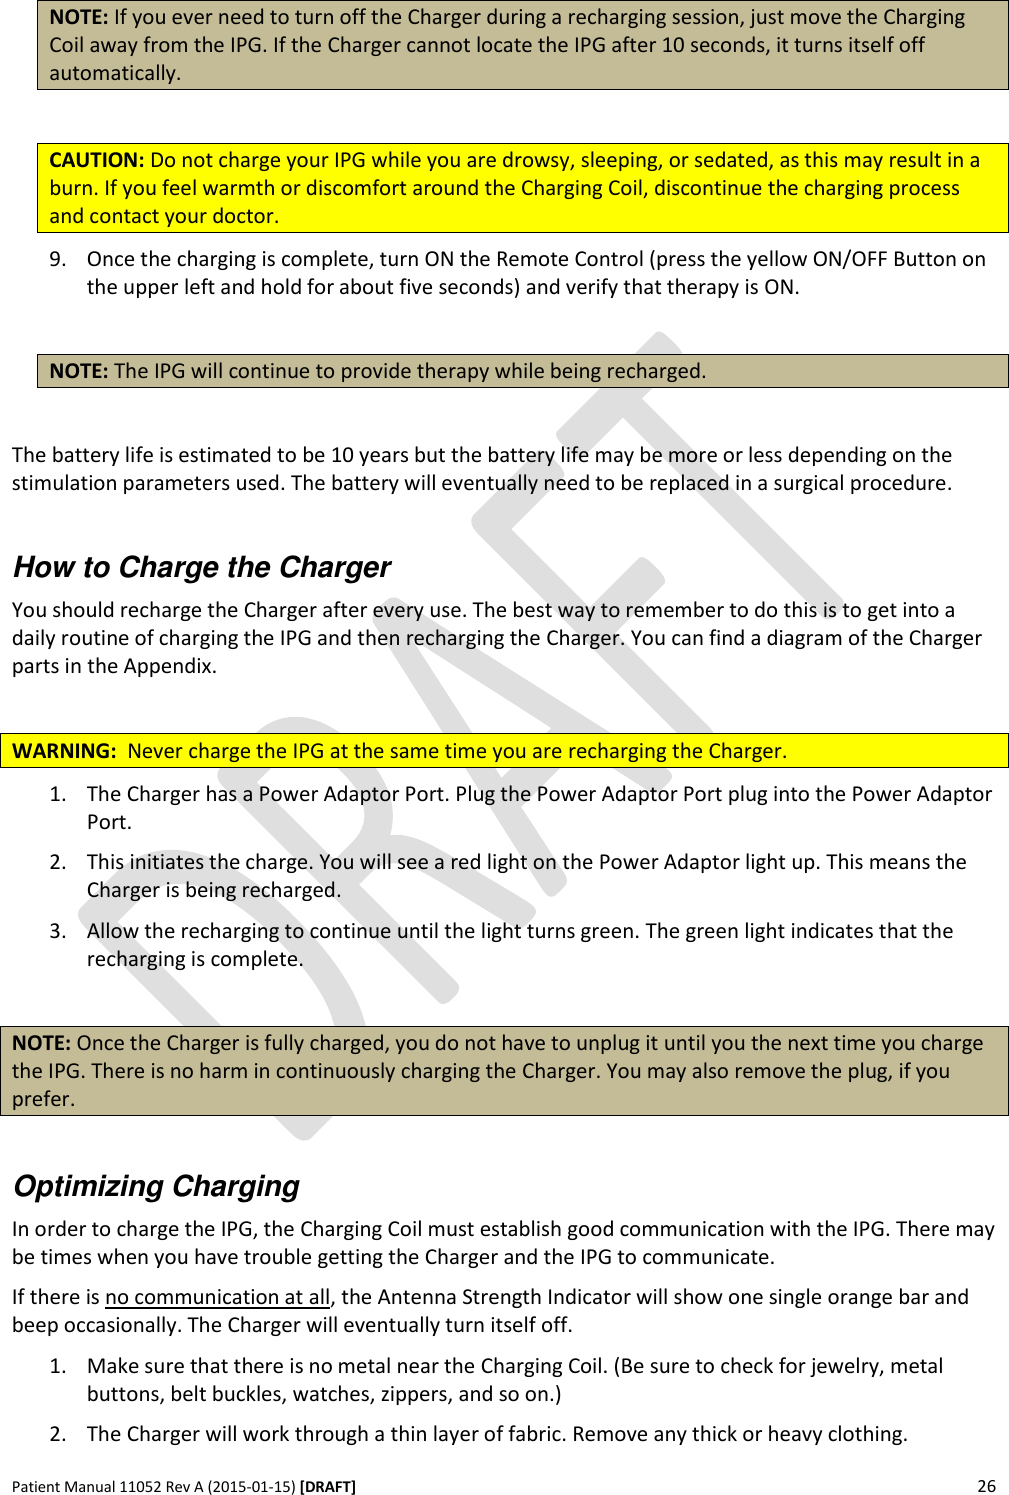      Patient Manual 11052 Rev A (2015-01-15) [DRAFT] 26   NOTE: If you ever need to turn off the Charger during a recharging session, just move the Charging Coil away from the IPG. If the Charger cannot locate the IPG after 10 seconds, it turns itself off automatically.   CAUTION: Do not charge your IPG while you are drowsy, sleeping, or sedated, as this may result in a burn. If you feel warmth or discomfort around the Charging Coil, discontinue the charging process and contact your doctor.  9. Once the charging is complete, turn ON the Remote Control (press the yellow ON/OFF Button on the upper left and hold for about five seconds) and verify that therapy is ON.  NOTE: The IPG will continue to provide therapy while being recharged.  The battery life is estimated to be 10 years but the battery life may be more or less depending on the stimulation parameters used. The battery will eventually need to be replaced in a surgical procedure.  How to Charge the Charger You should recharge the Charger after every use. The best way to remember to do this is to get into a daily routine of charging the IPG and then recharging the Charger. You can find a diagram of the Charger parts in the Appendix.  WARNING:  Never charge the IPG at the same time you are recharging the Charger. 1. The Charger has a Power Adaptor Port. Plug the Power Adaptor Port plug into the Power Adaptor Port. 2. This initiates the charge. You will see a red light on the Power Adaptor light up. This means the Charger is being recharged.  3. Allow the recharging to continue until the light turns green. The green light indicates that the recharging is complete.  NOTE: Once the Charger is fully charged, you do not have to unplug it until you the next time you charge the IPG. There is no harm in continuously charging the Charger. You may also remove the plug, if you prefer.  Optimizing Charging In order to charge the IPG, the Charging Coil must establish good communication with the IPG. There may be times when you have trouble getting the Charger and the IPG to communicate. If there is no communication at all, the Antenna Strength Indicator will show one single orange bar and beep occasionally. The Charger will eventually turn itself off. 1. Make sure that there is no metal near the Charging Coil. (Be sure to check for jewelry, metal buttons, belt buckles, watches, zippers, and so on.) 2. The Charger will work through a thin layer of fabric. Remove any thick or heavy clothing. 